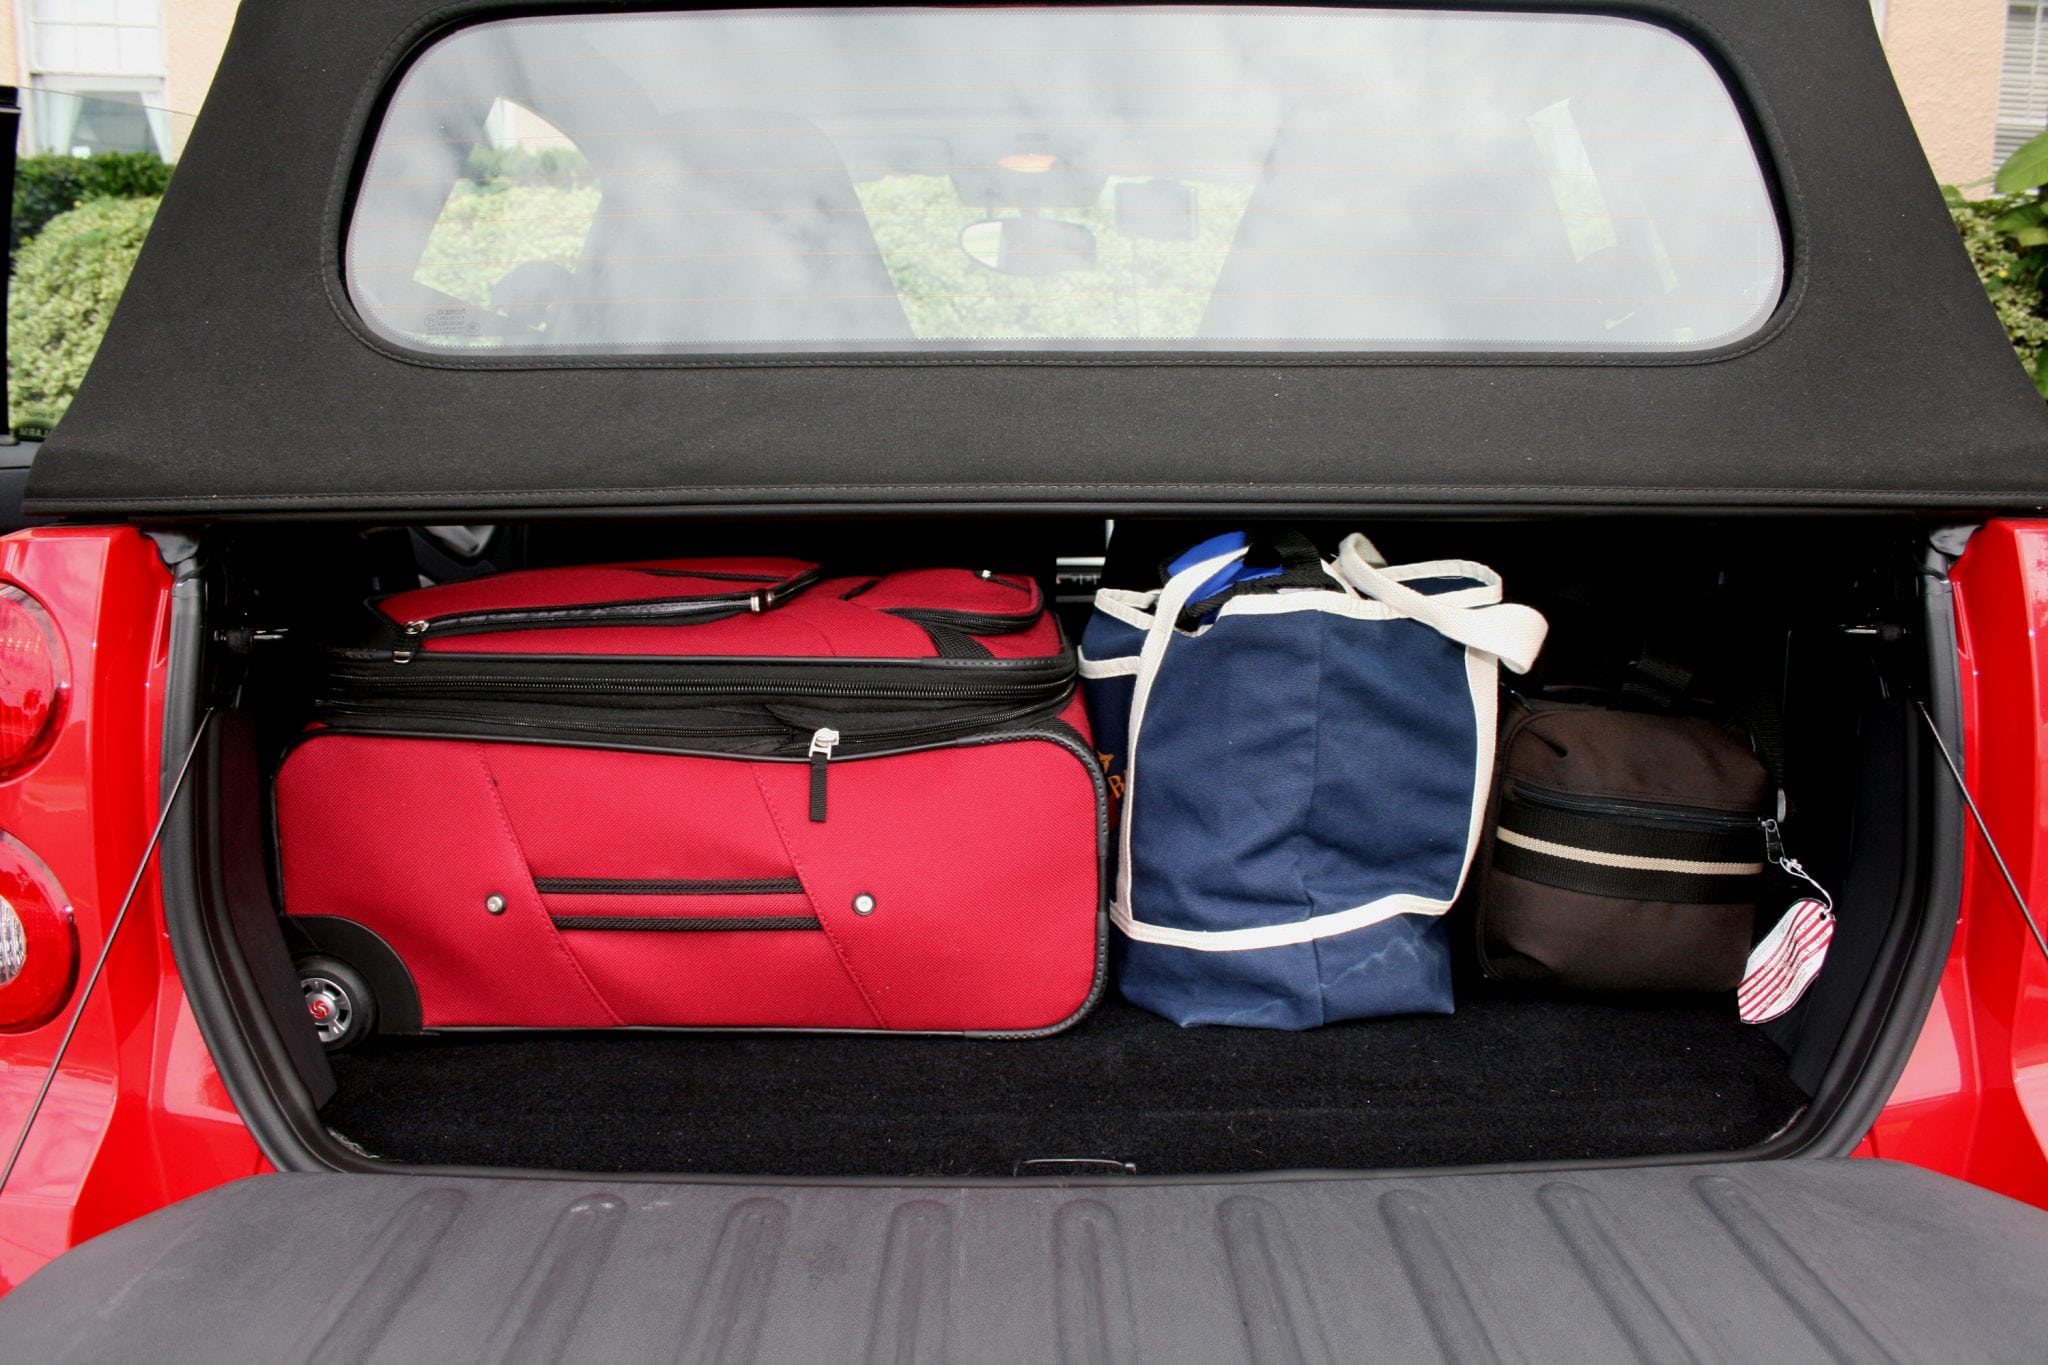 A 22-inch roll-aboard suitcase, a full totebar and a camera bag packed in a car. 